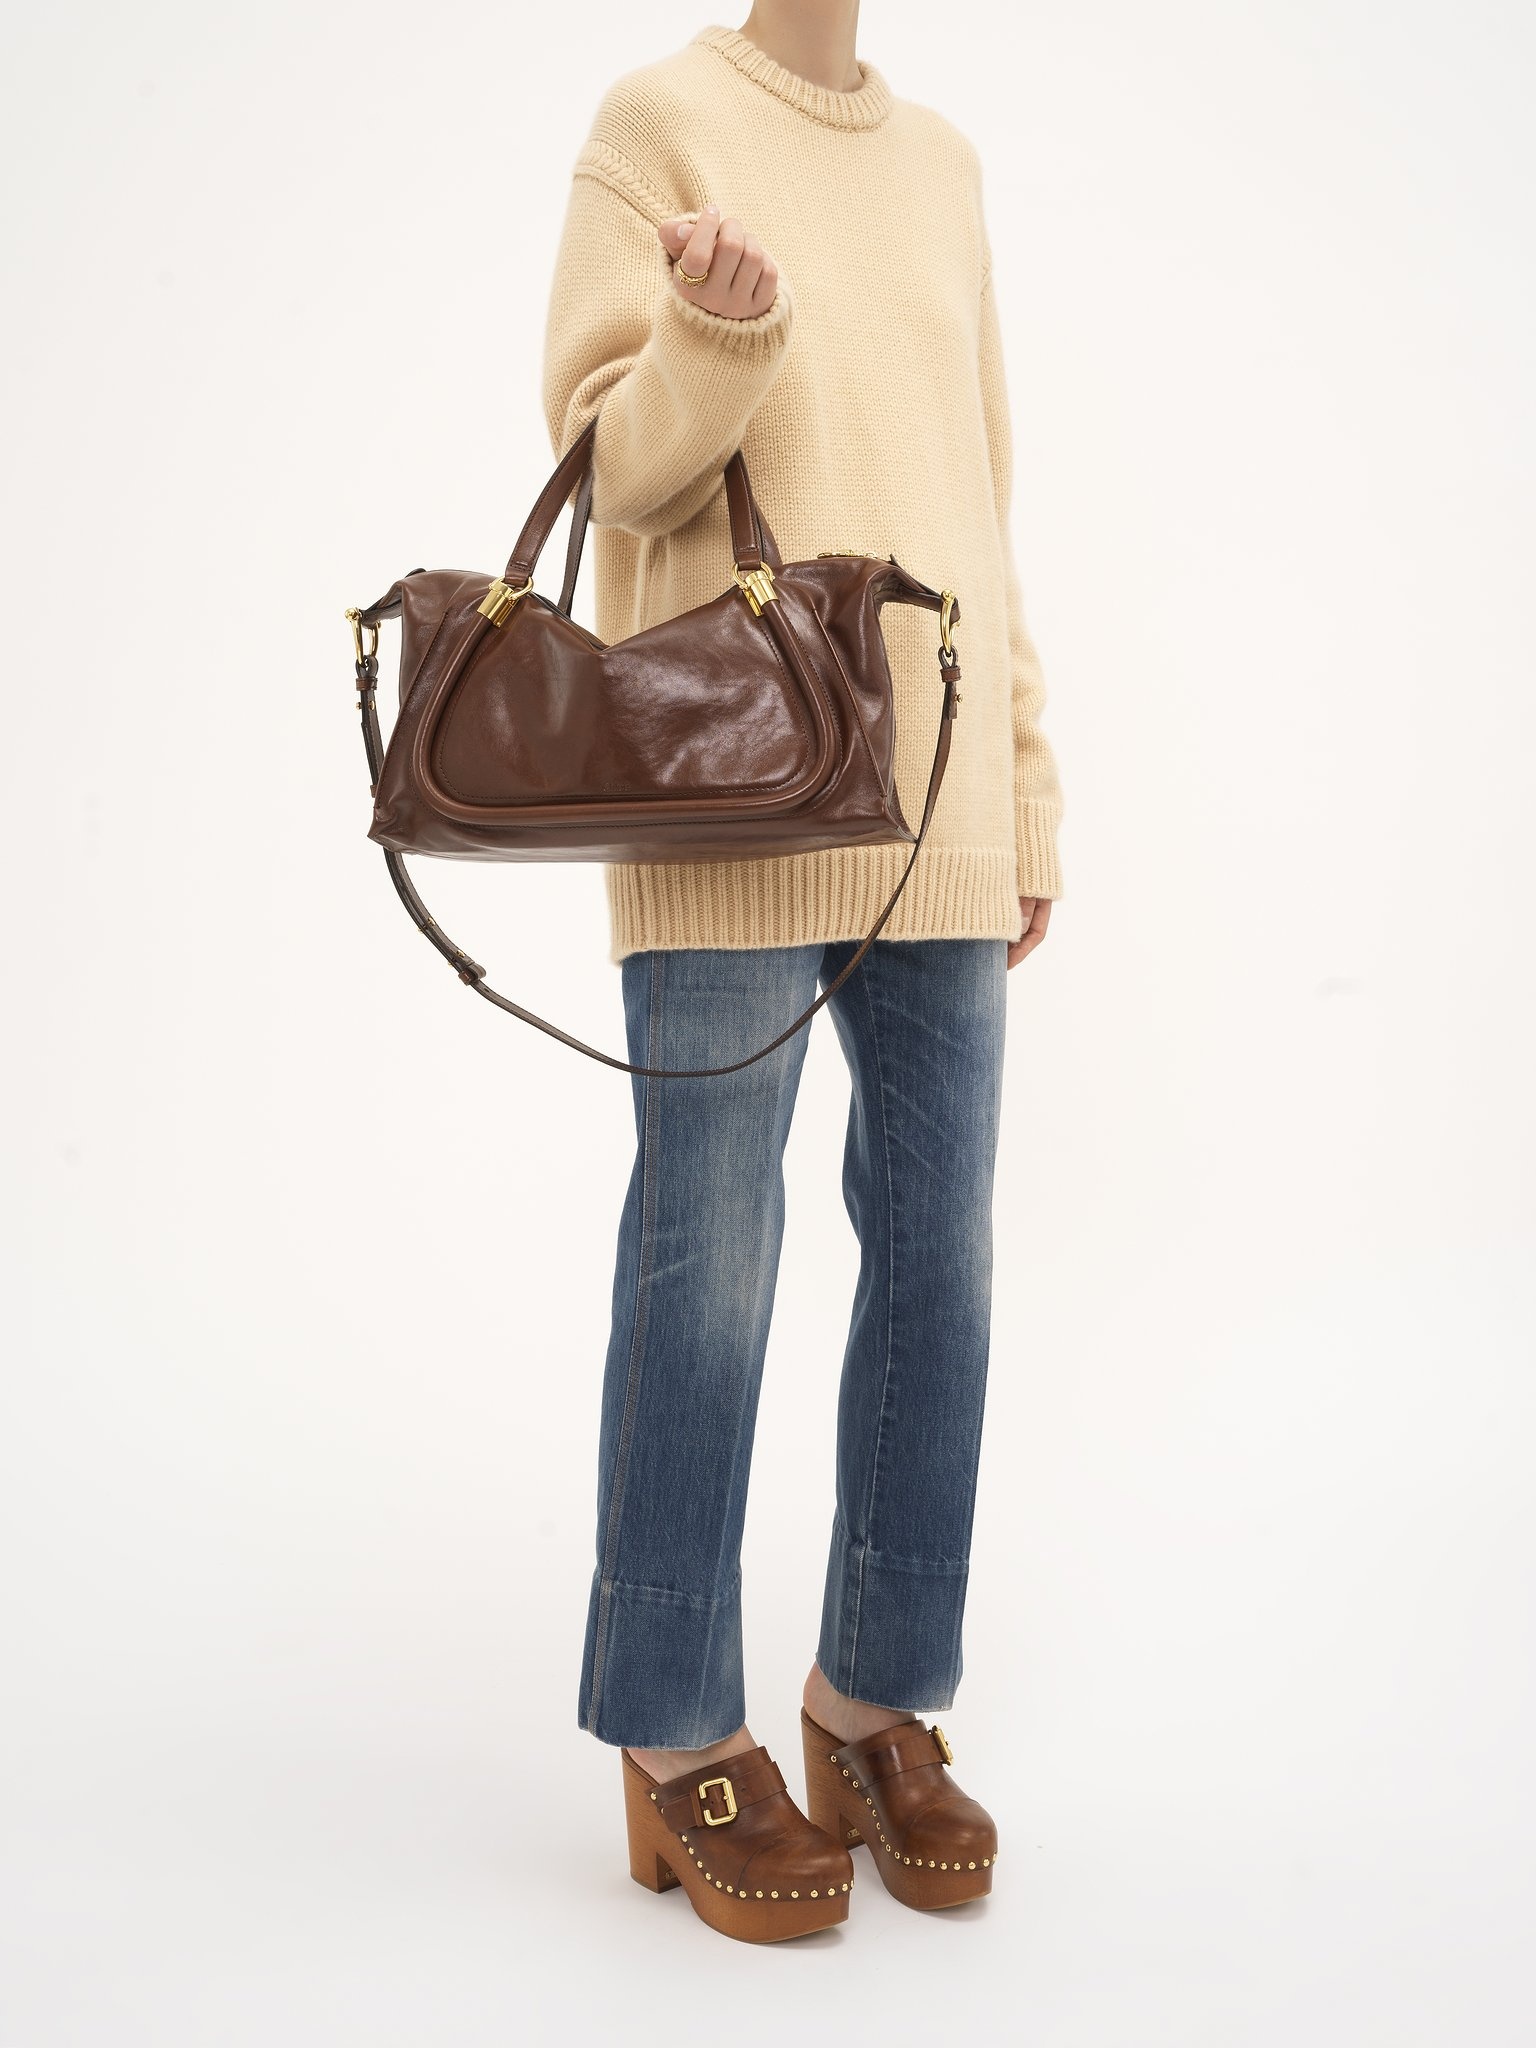 PARATY 24 BAG IN SOFT LEATHER - 8